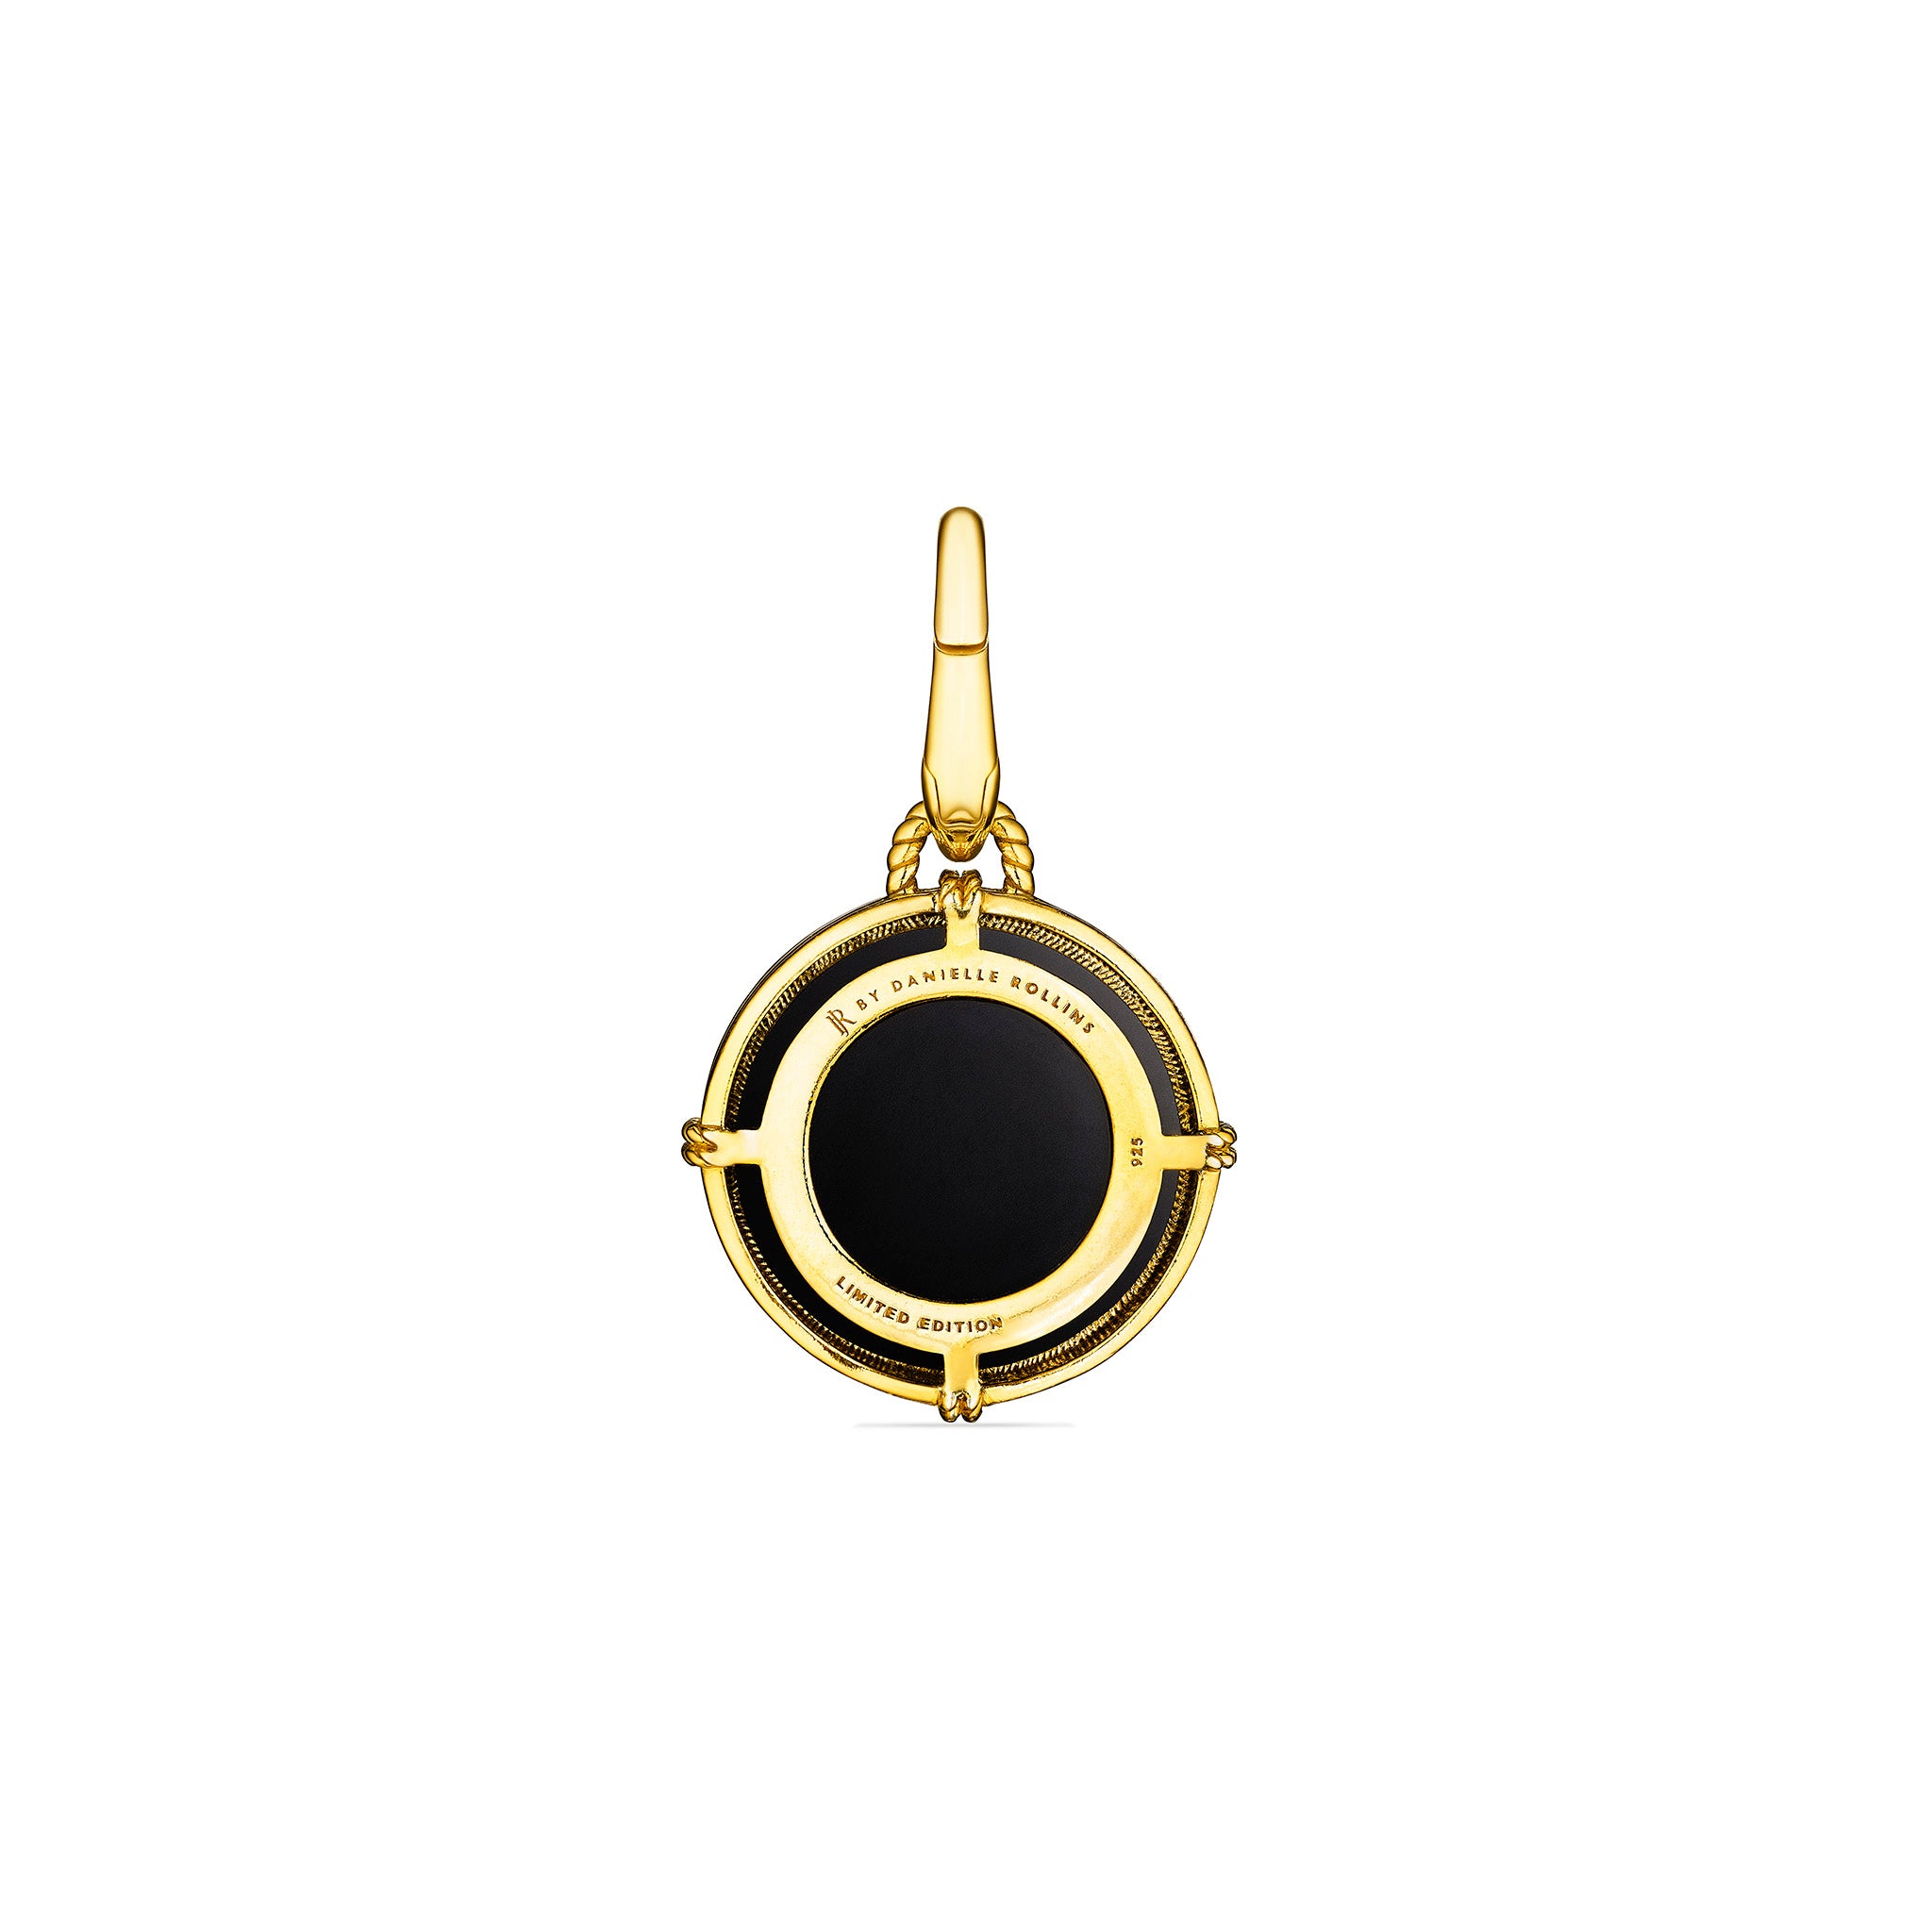 Ocean Reef Anchor Medallion with Black Onyx and Blue Topaz in 18K Gold Vermeil